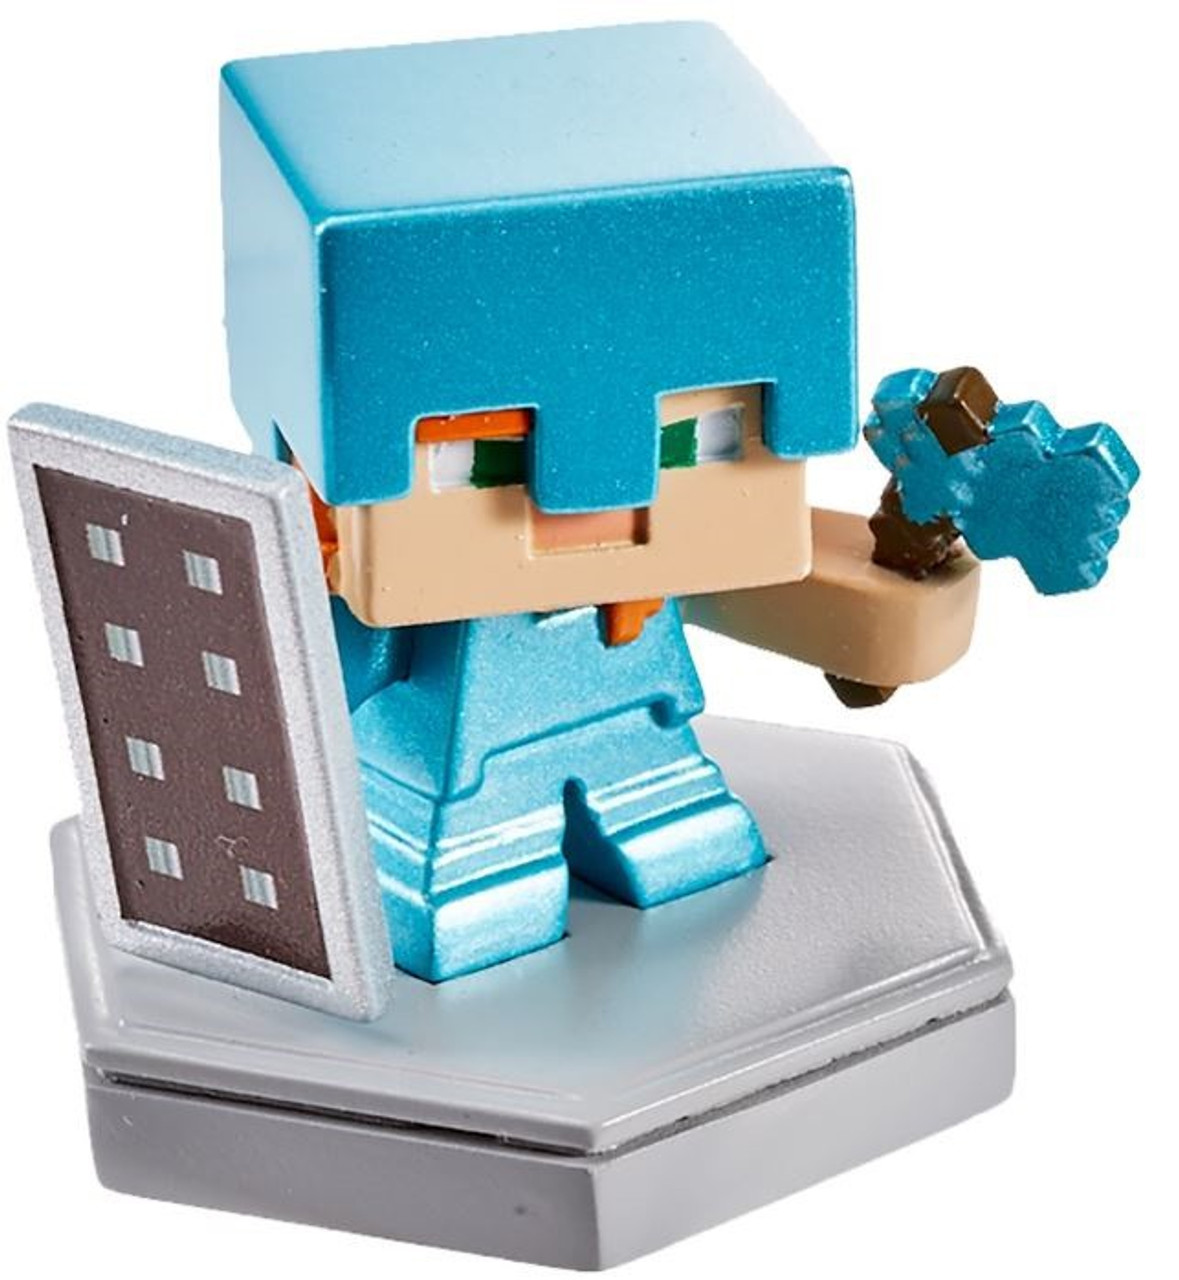 for sale online new 2019 Mattel Minecraft Earth Carry Along Potion Case